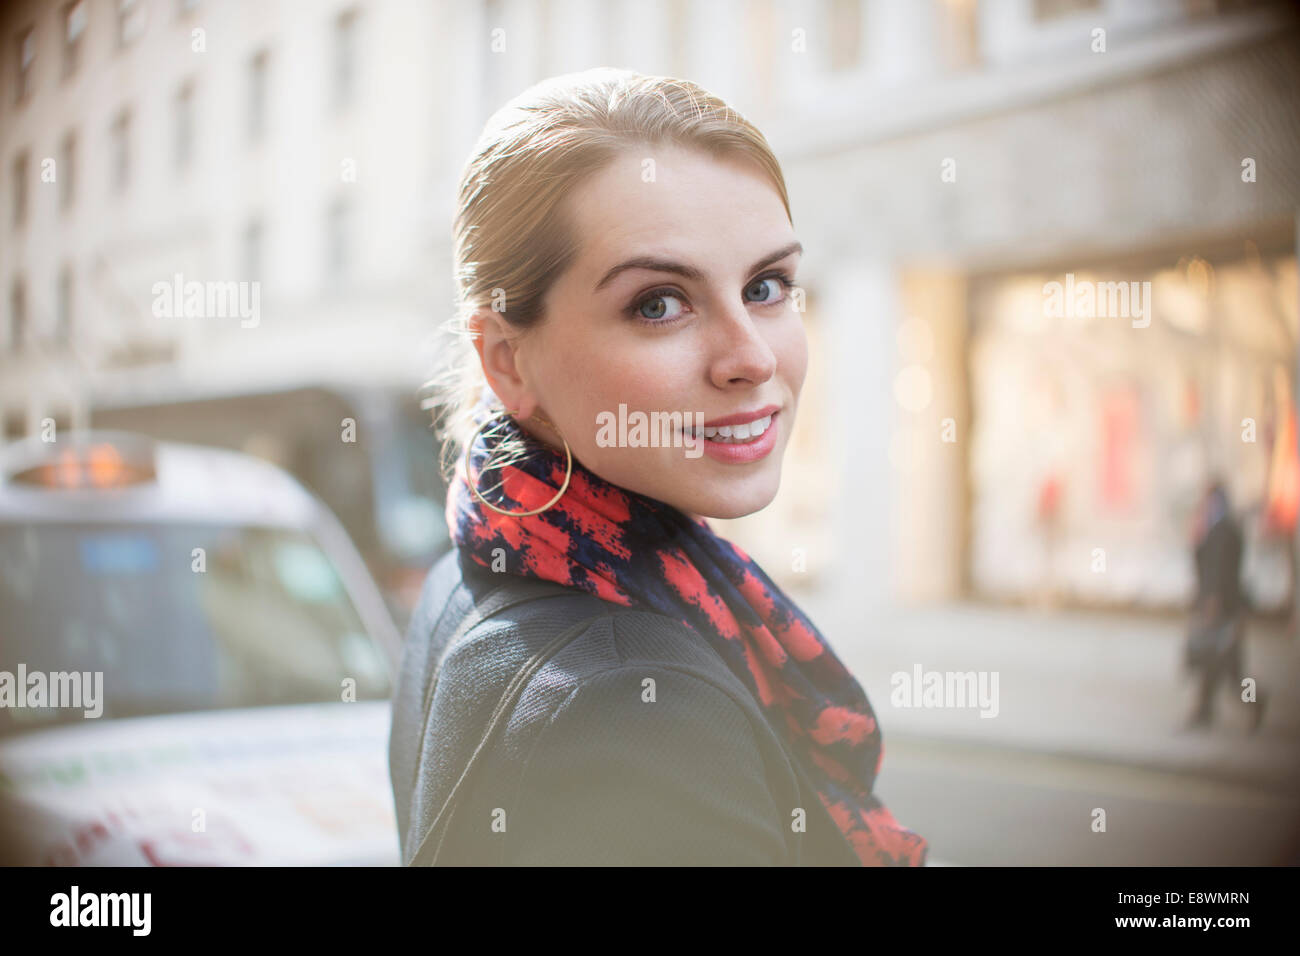 Woman smiling on city street Banque D'Images